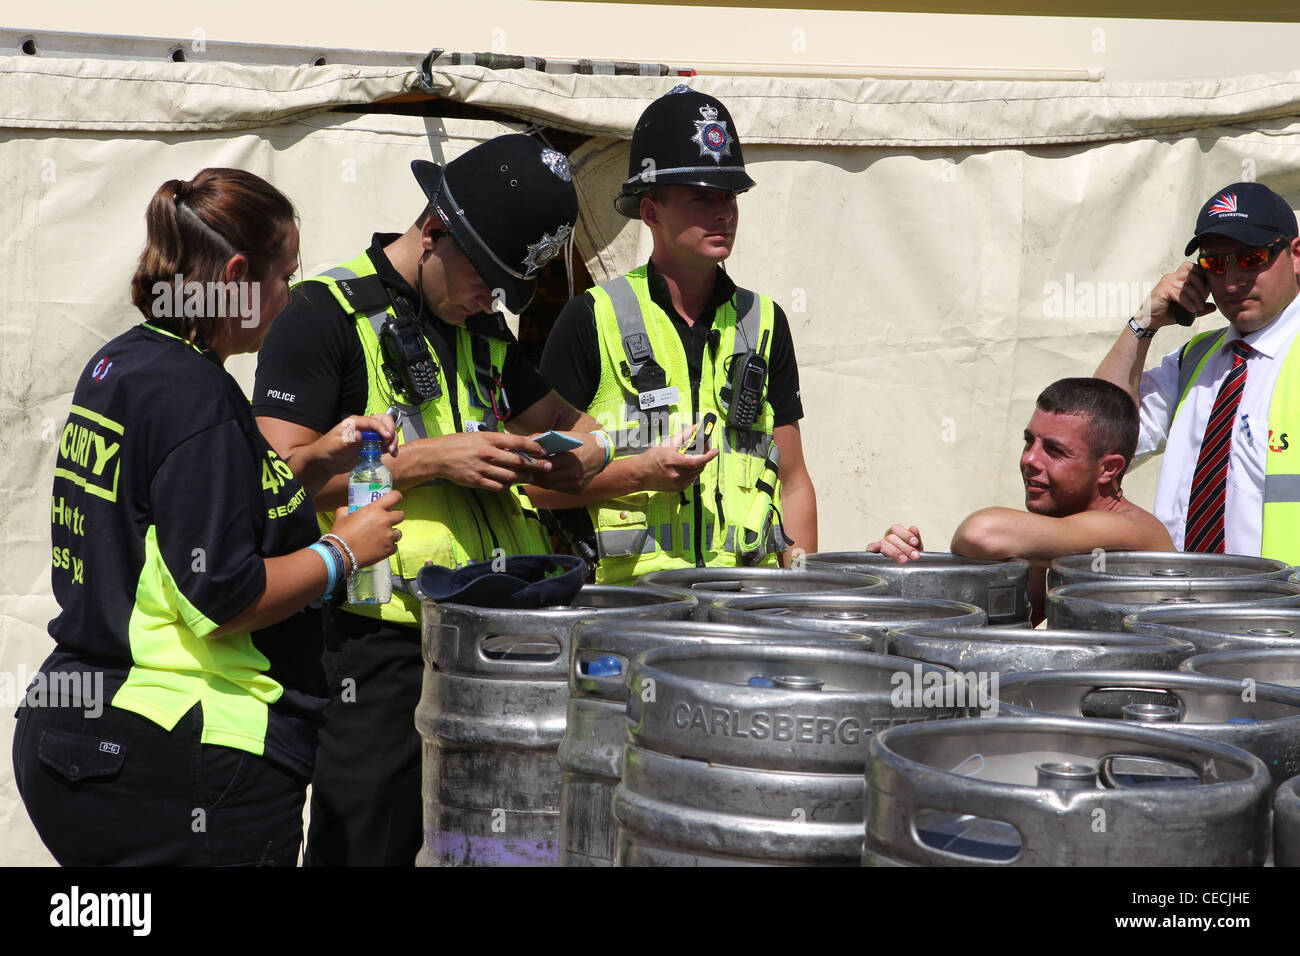 Police questioning and arresting man at the British Formula One Grand Prix Stock Photo